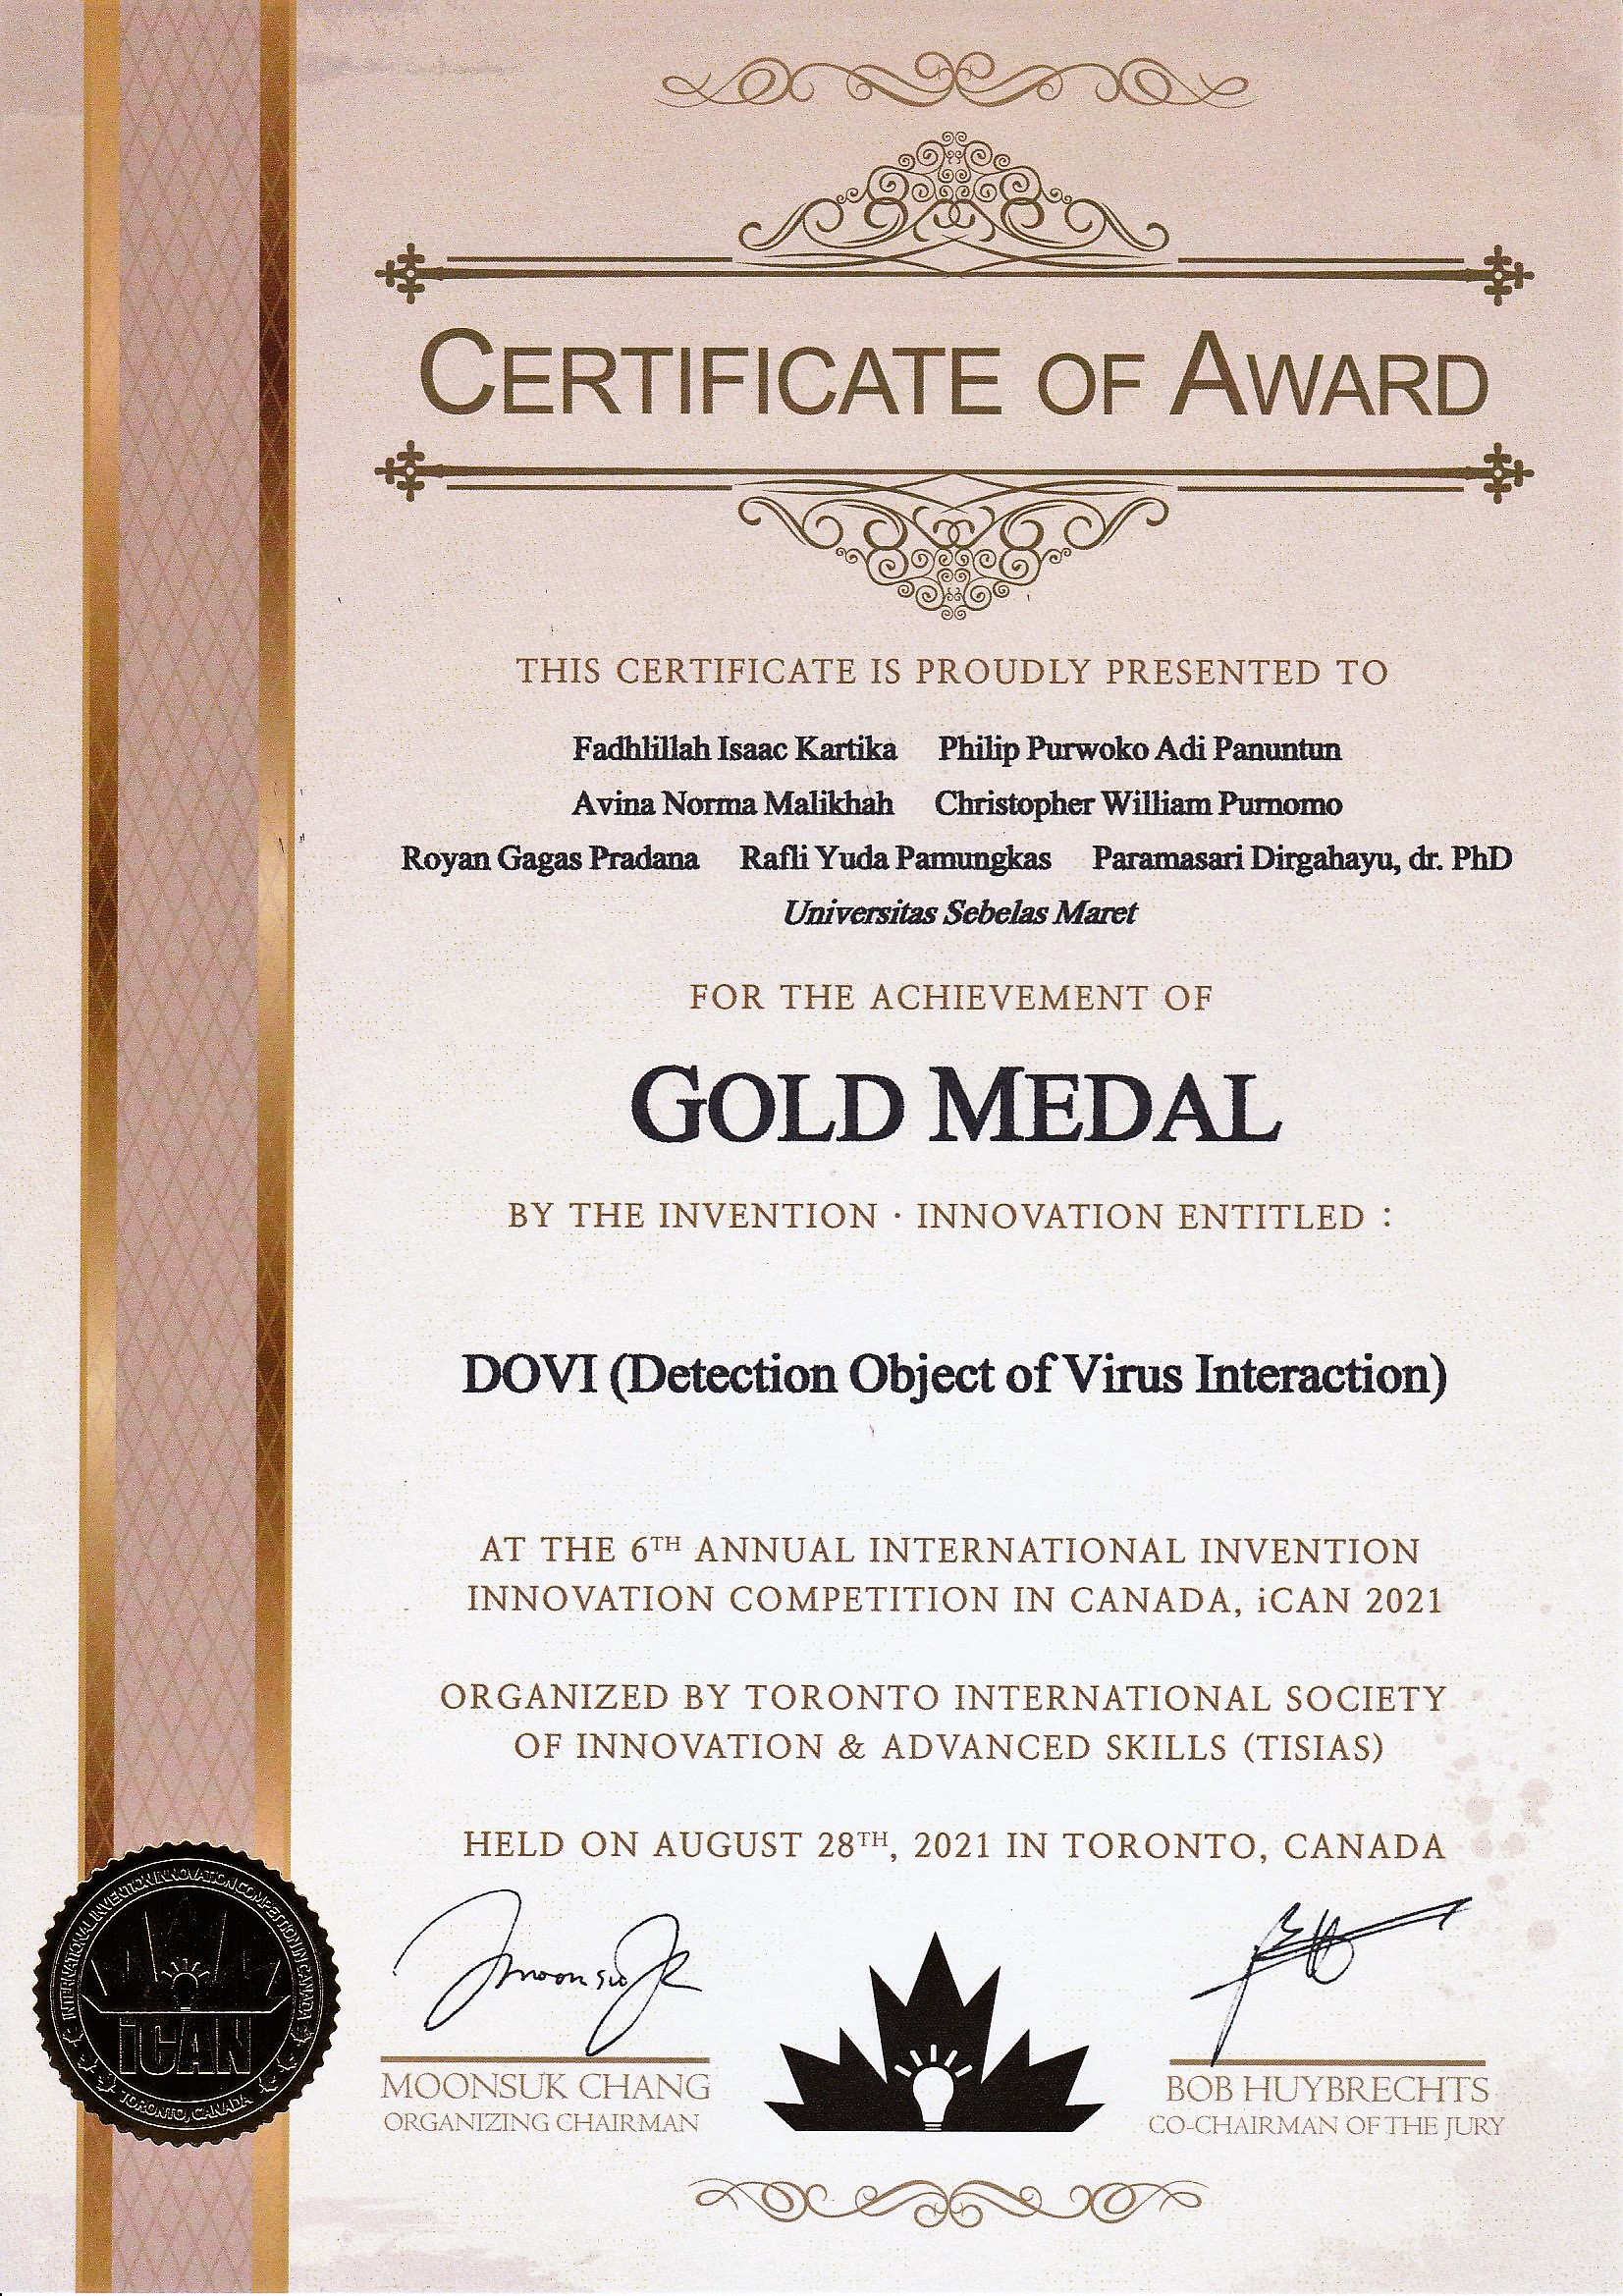 The 6th International Invention Innovation Competition in Canada - Gold Medal Award Certificate.jpg